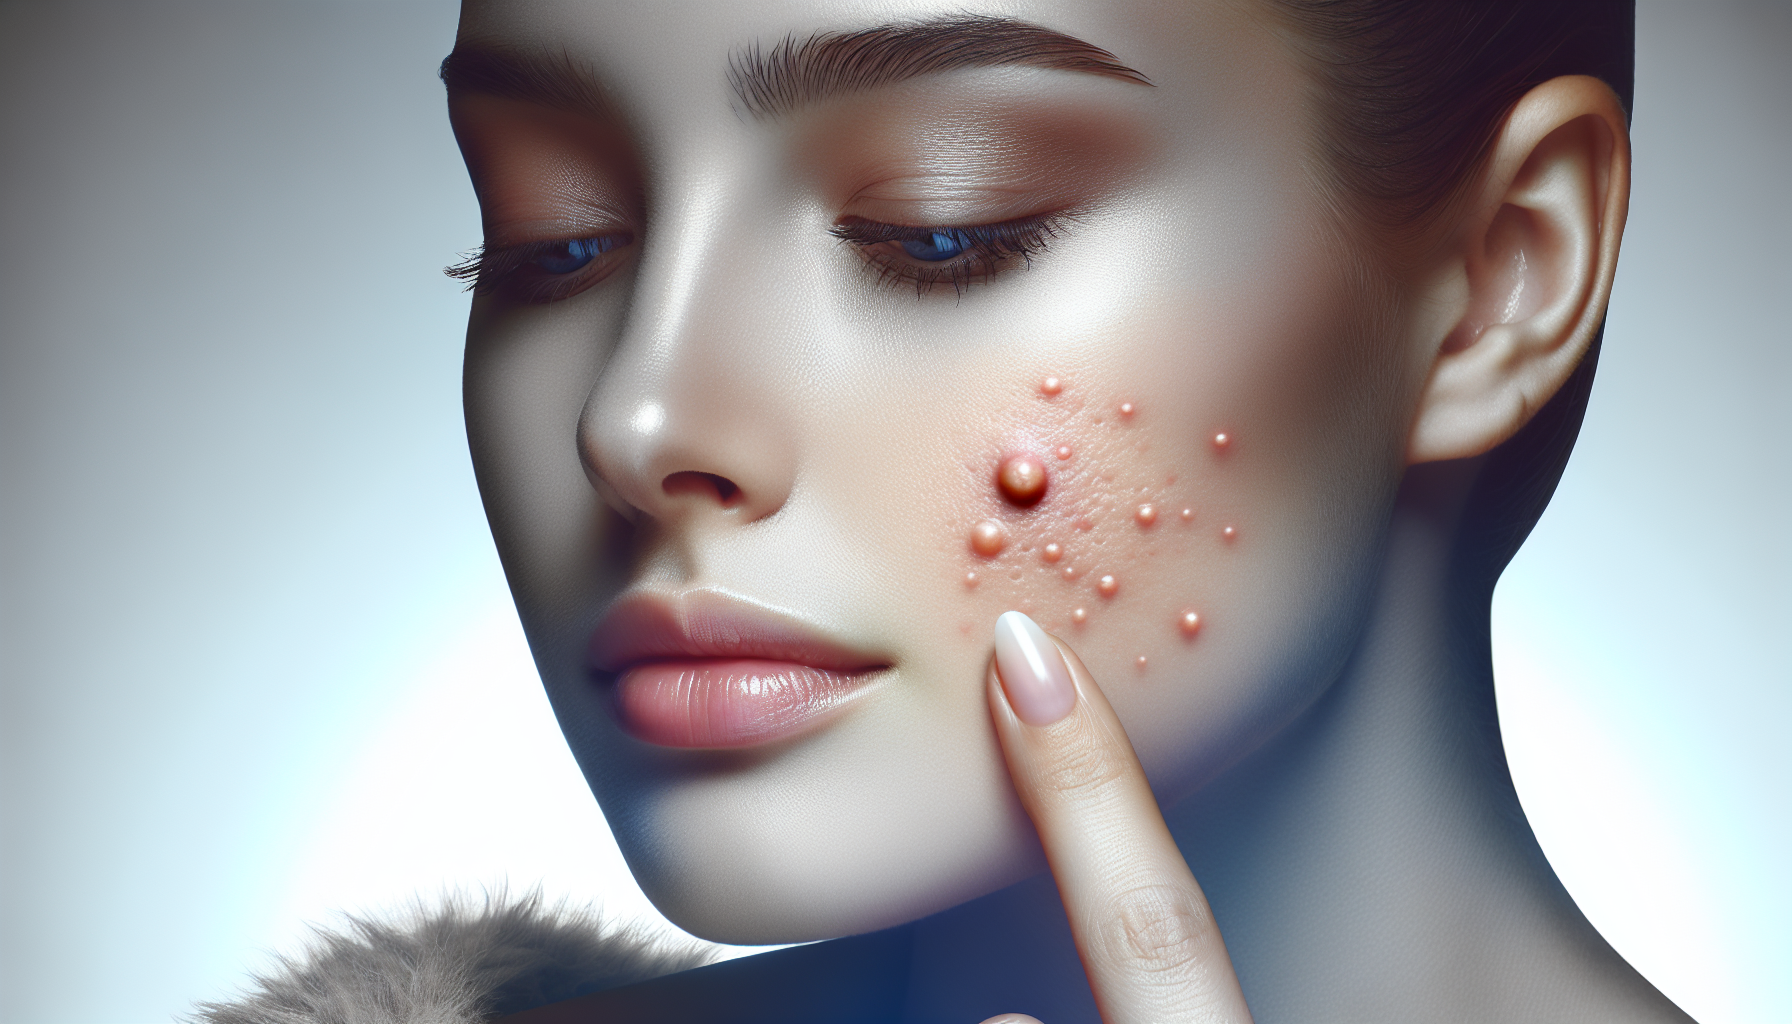 How Do You Permanently Treat Pimples?